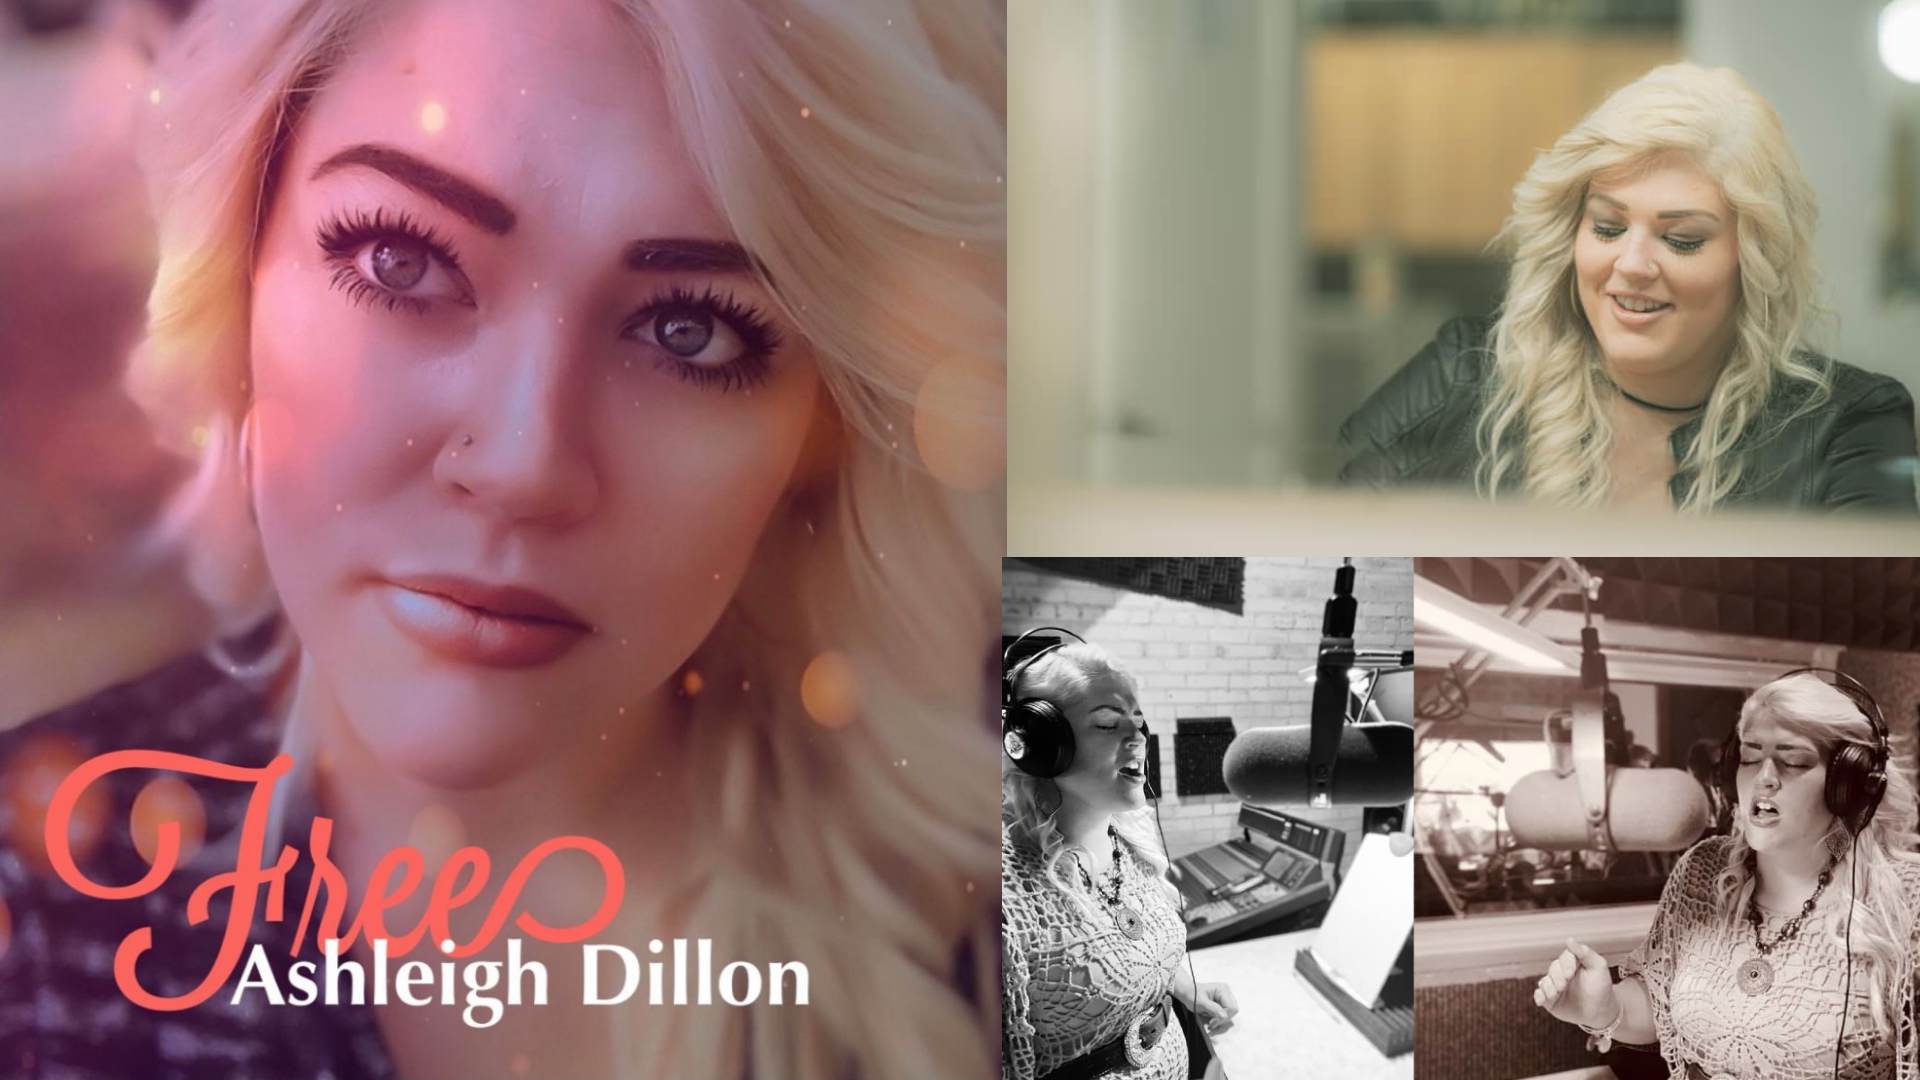 Exclusive: Latest News on Actress & Singer Ashleigh Dillon! Single ‘Free’ Out Now Stream!